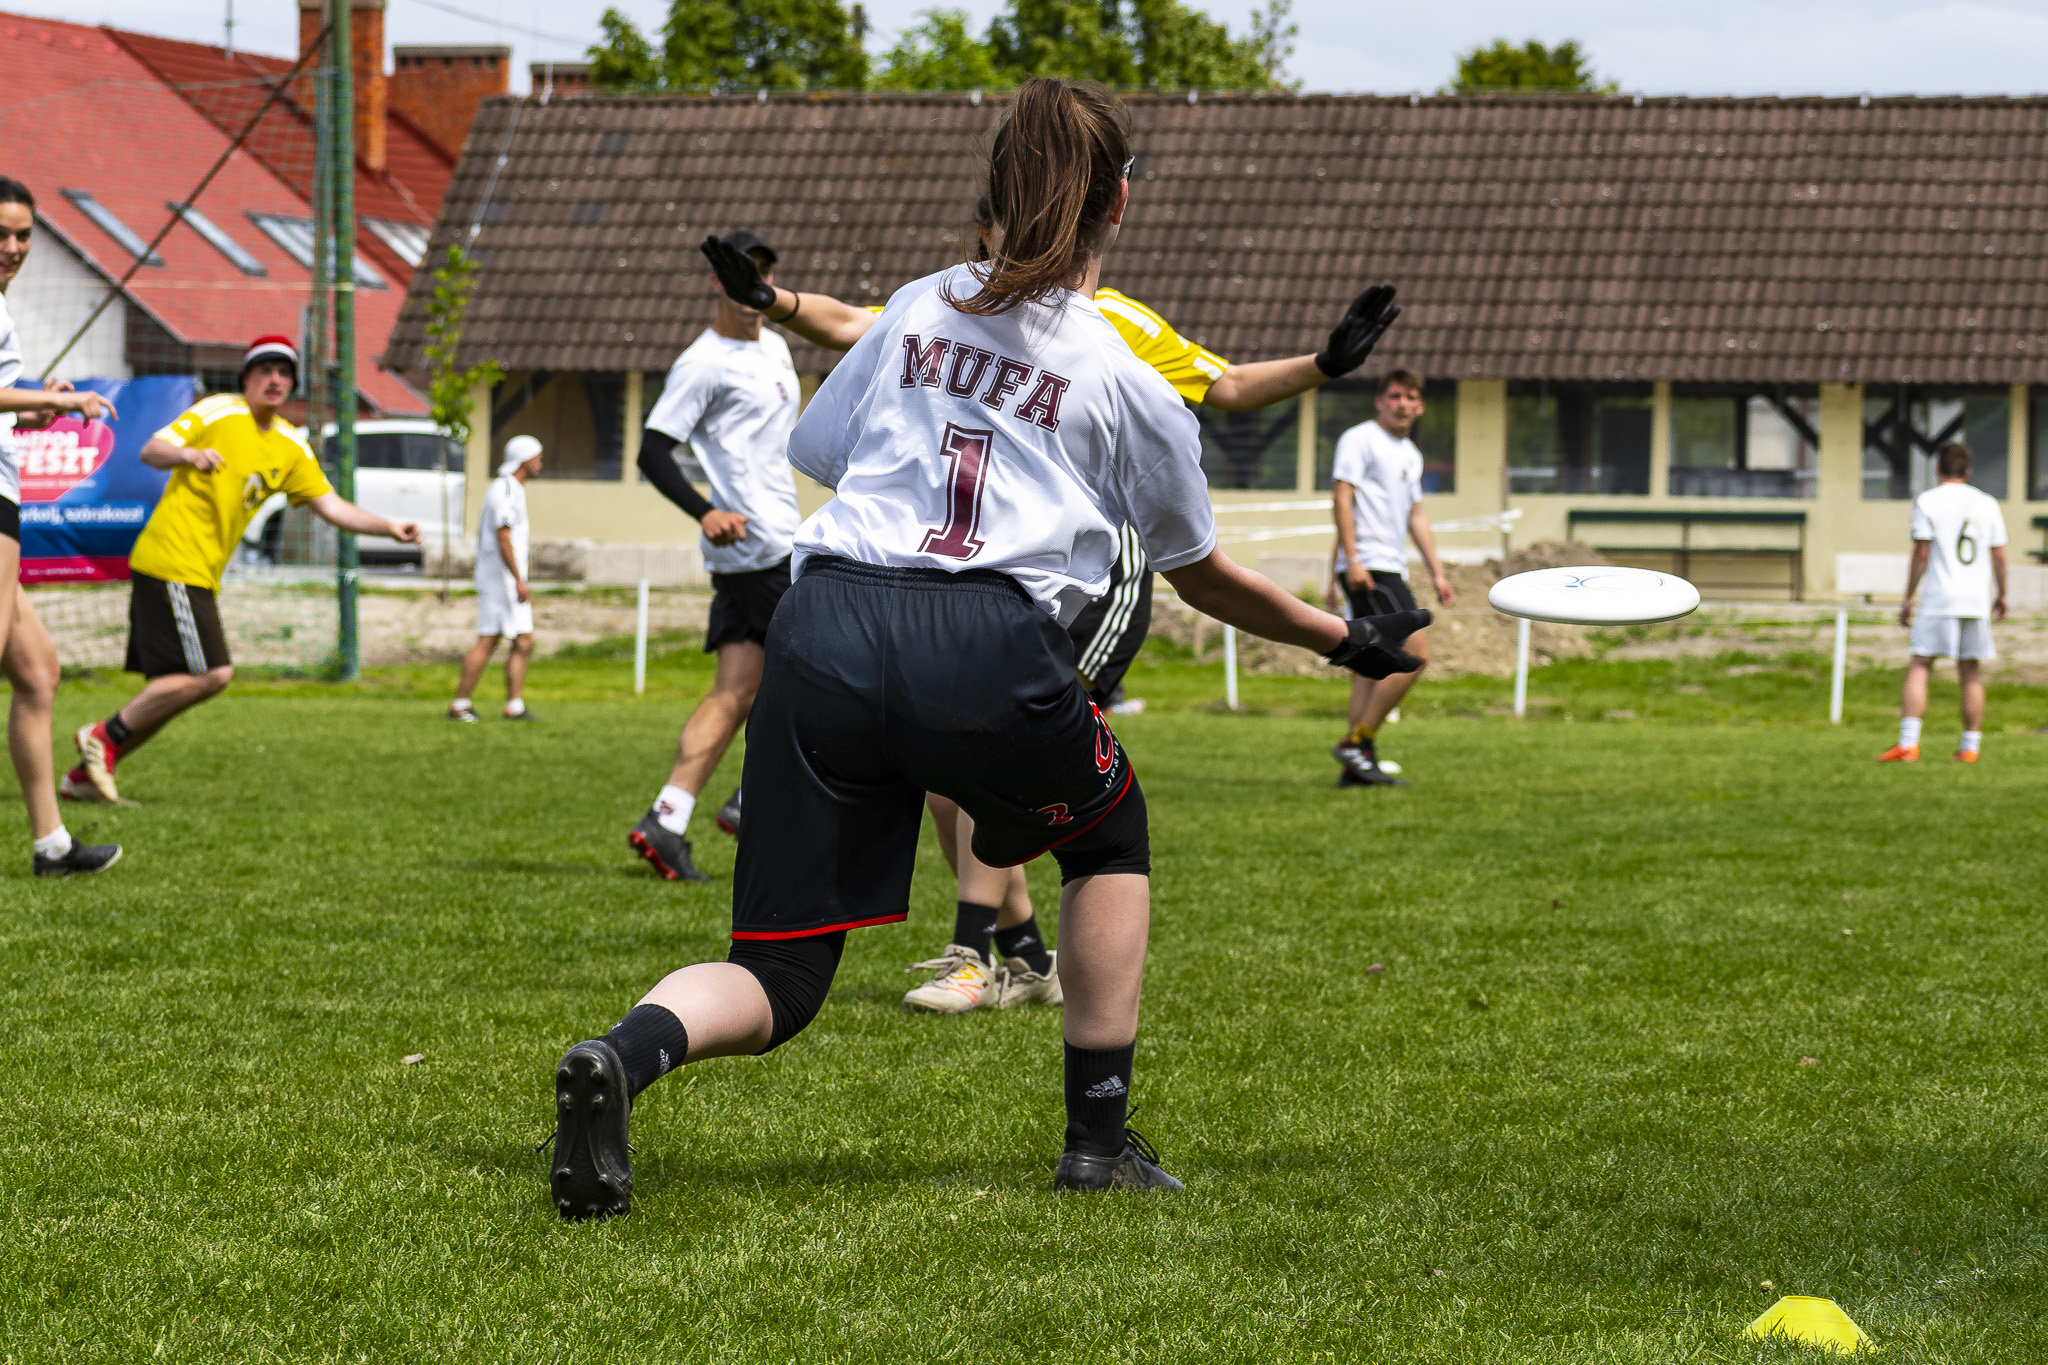 The MEFOB Festival in Győr was characterized by high quality, sport competitions